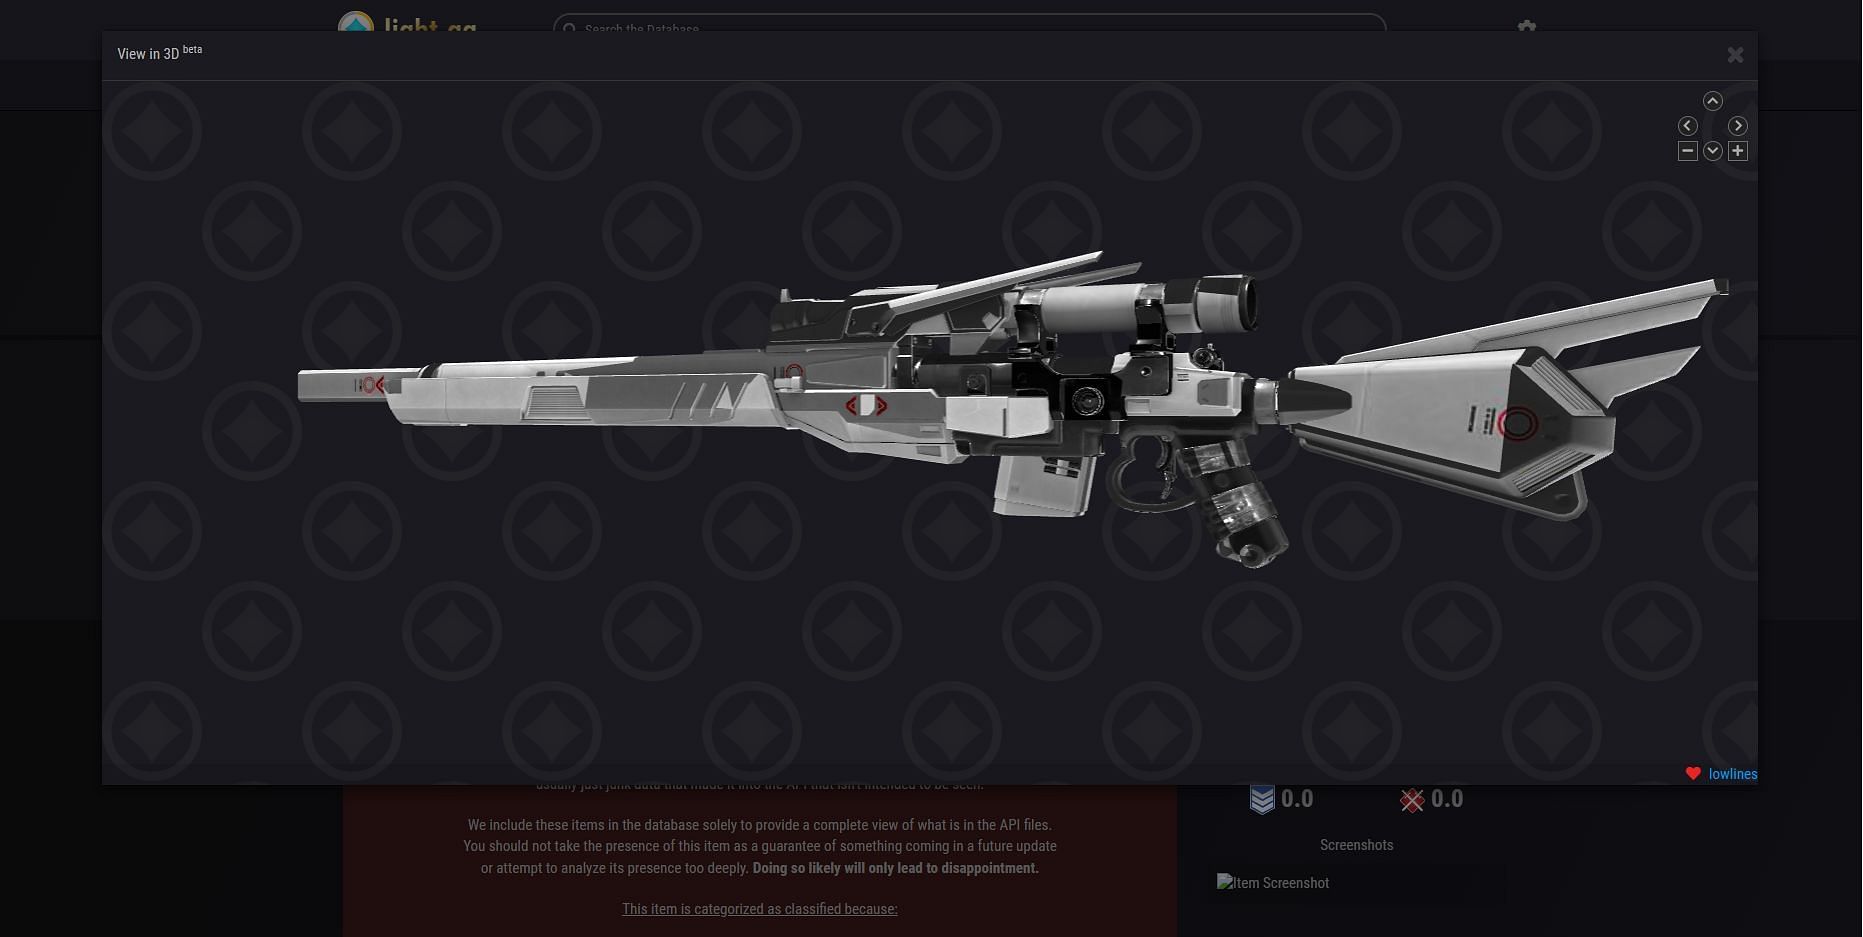 Destiny 2 Festival of the Lost 2022 leaks hint at a new Sniper Rifle